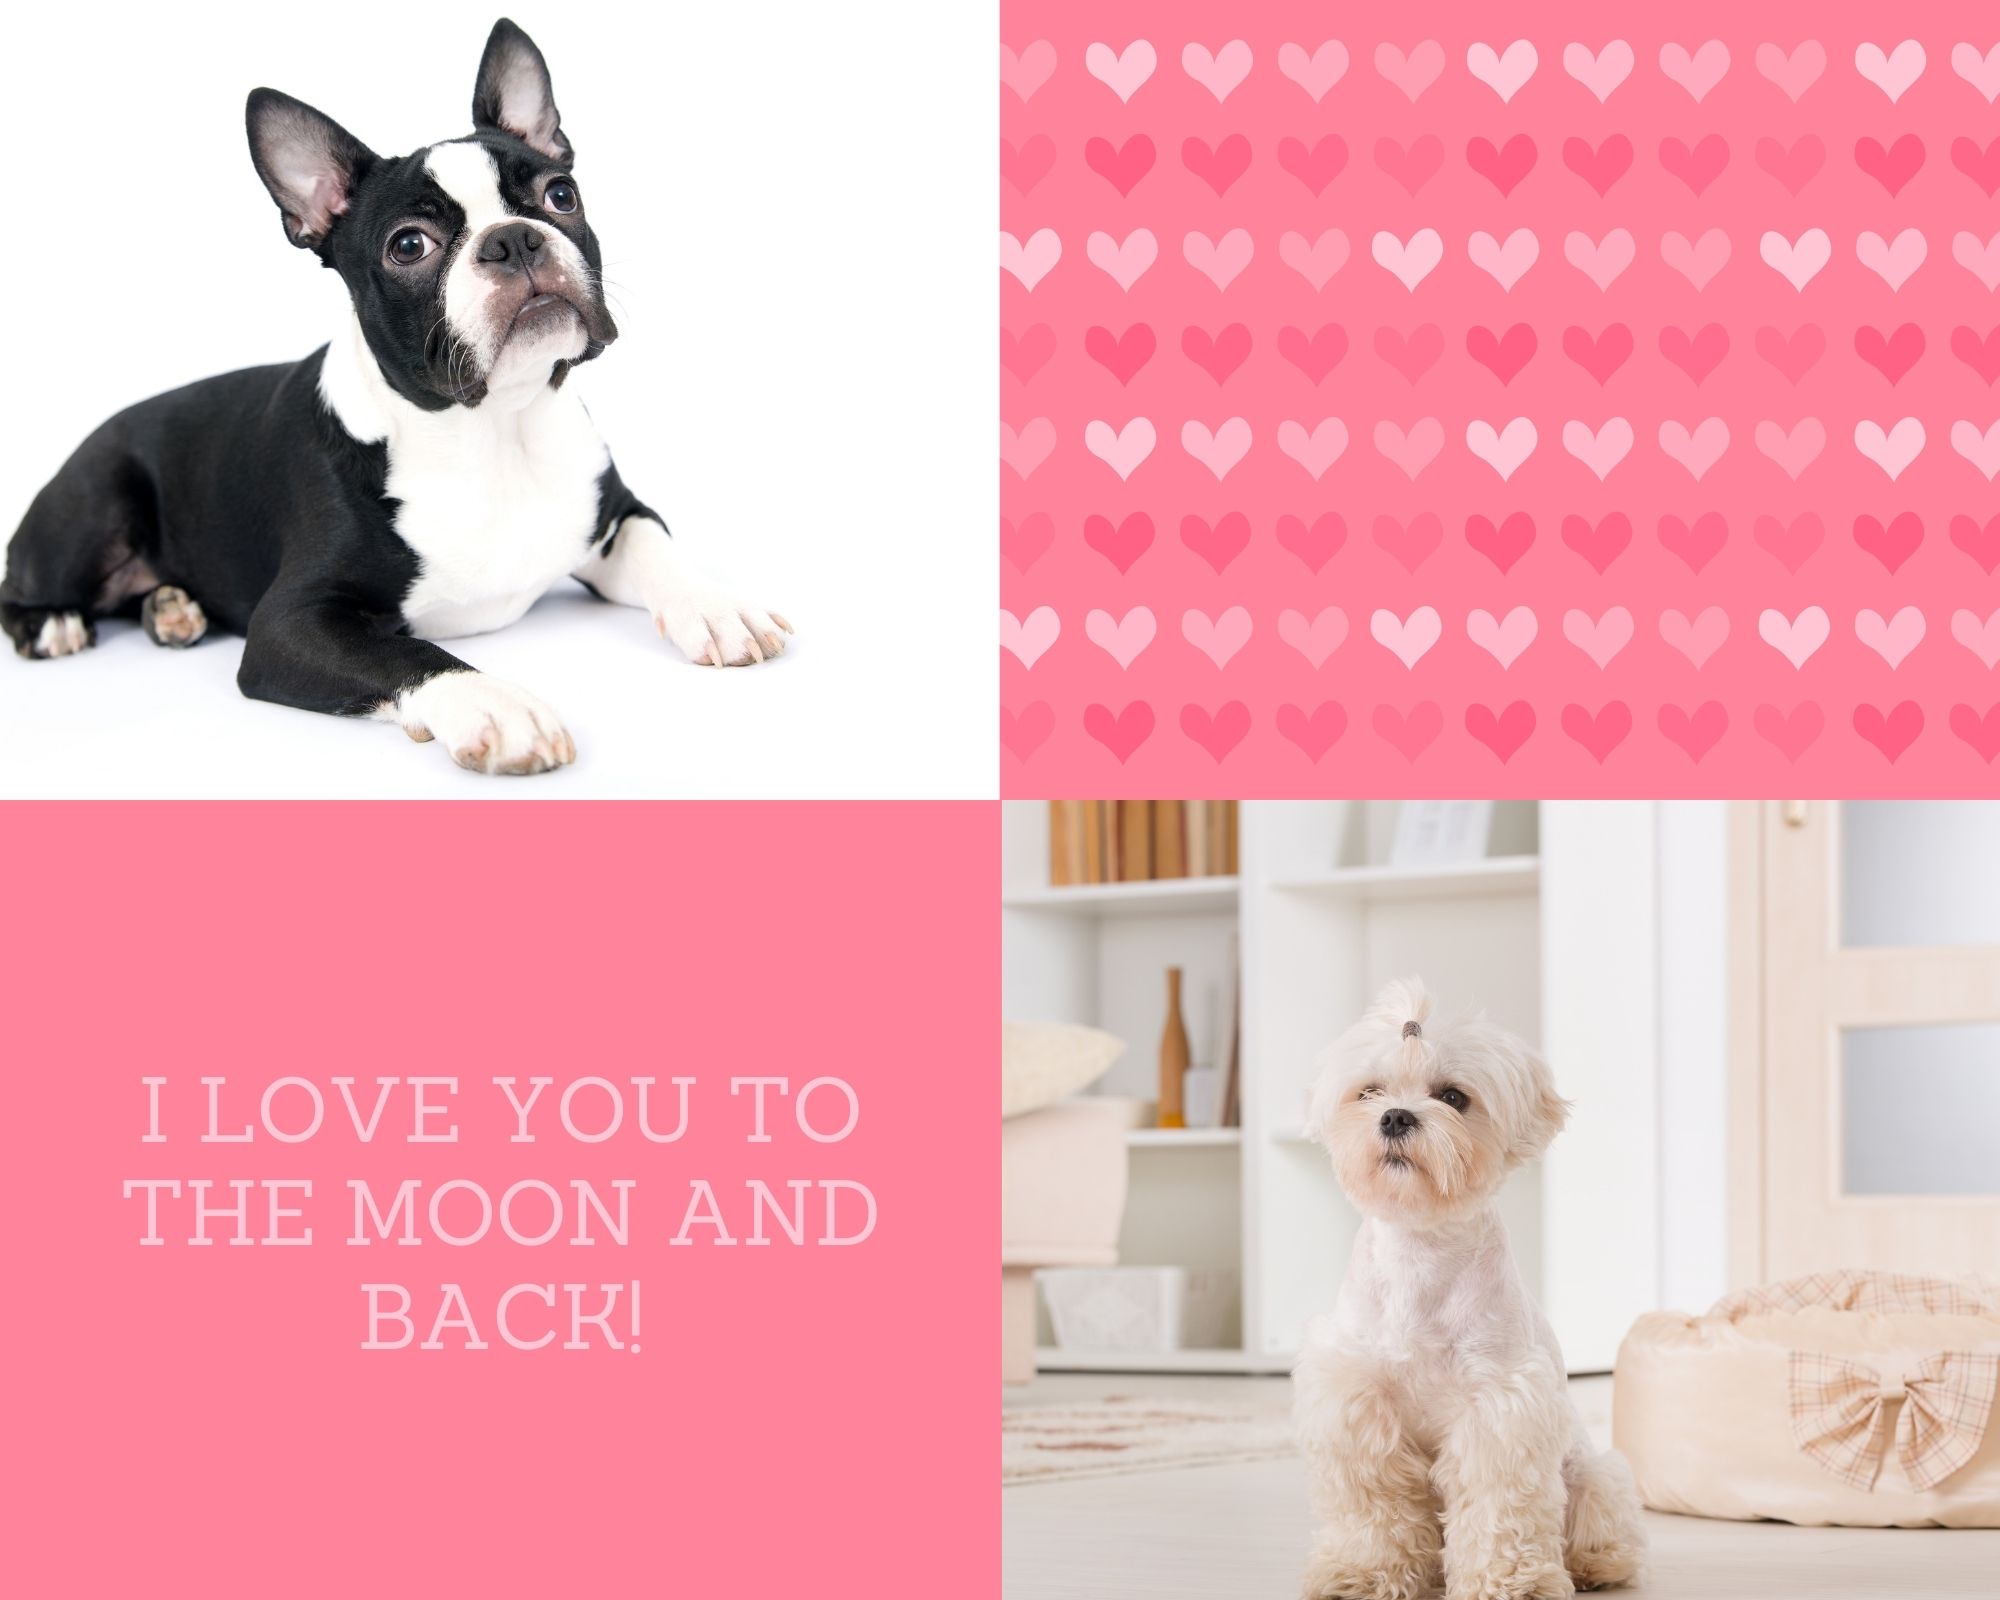 picture of boston terrier on white background and picture of maltese in white living room with "I love you to the moon and back" written on pink background.